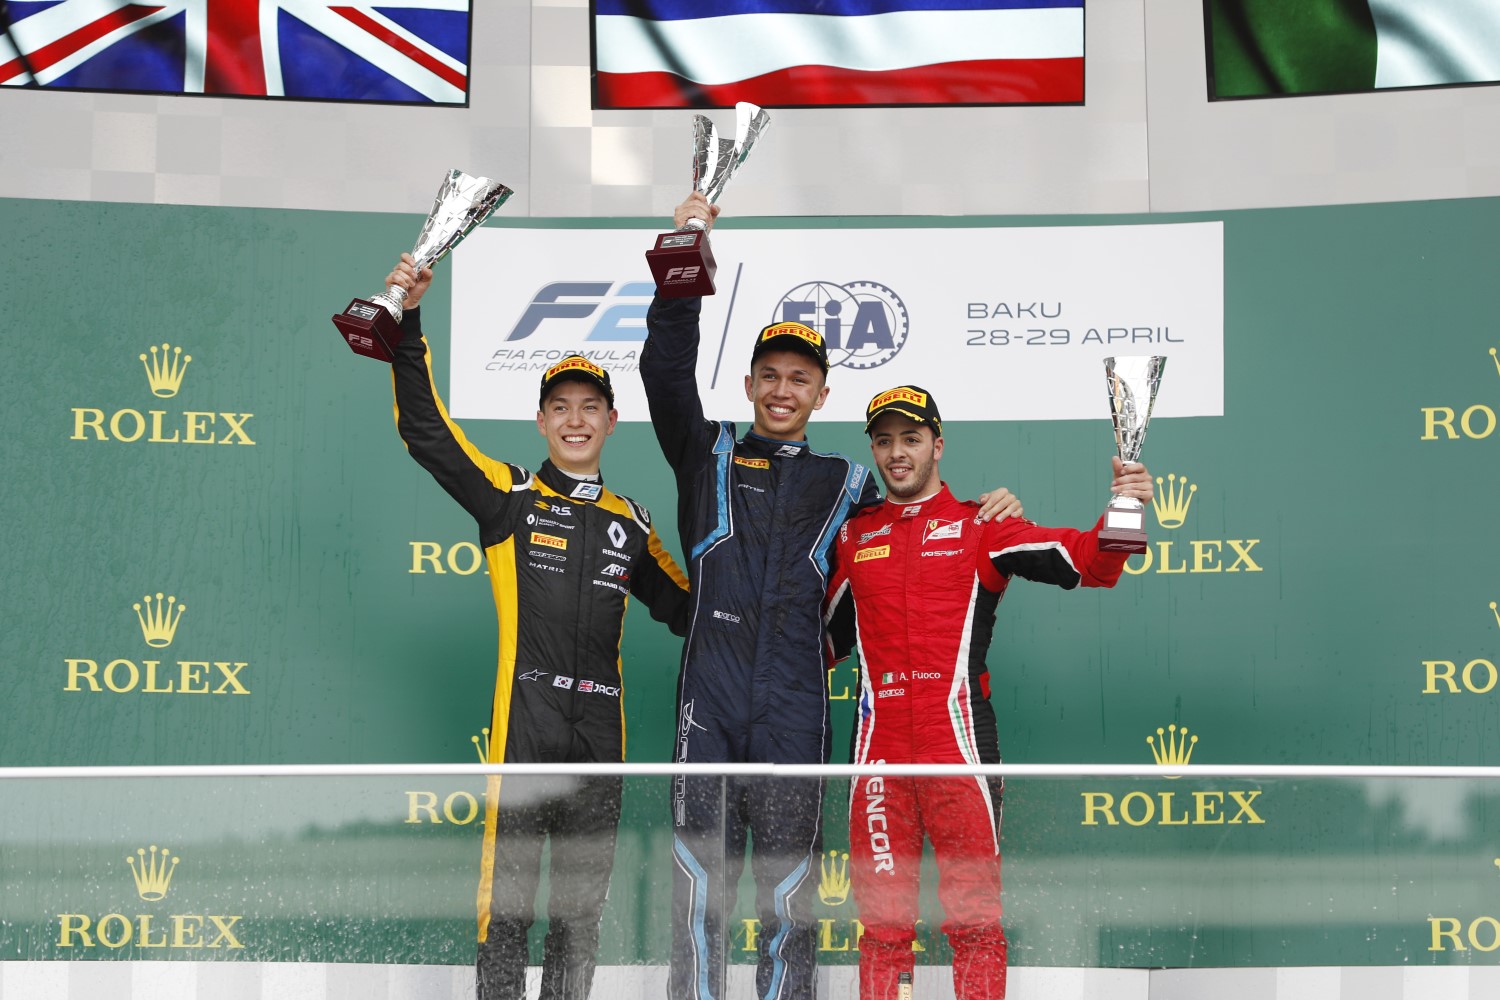 From left, Aitken, Albon and Fuoco